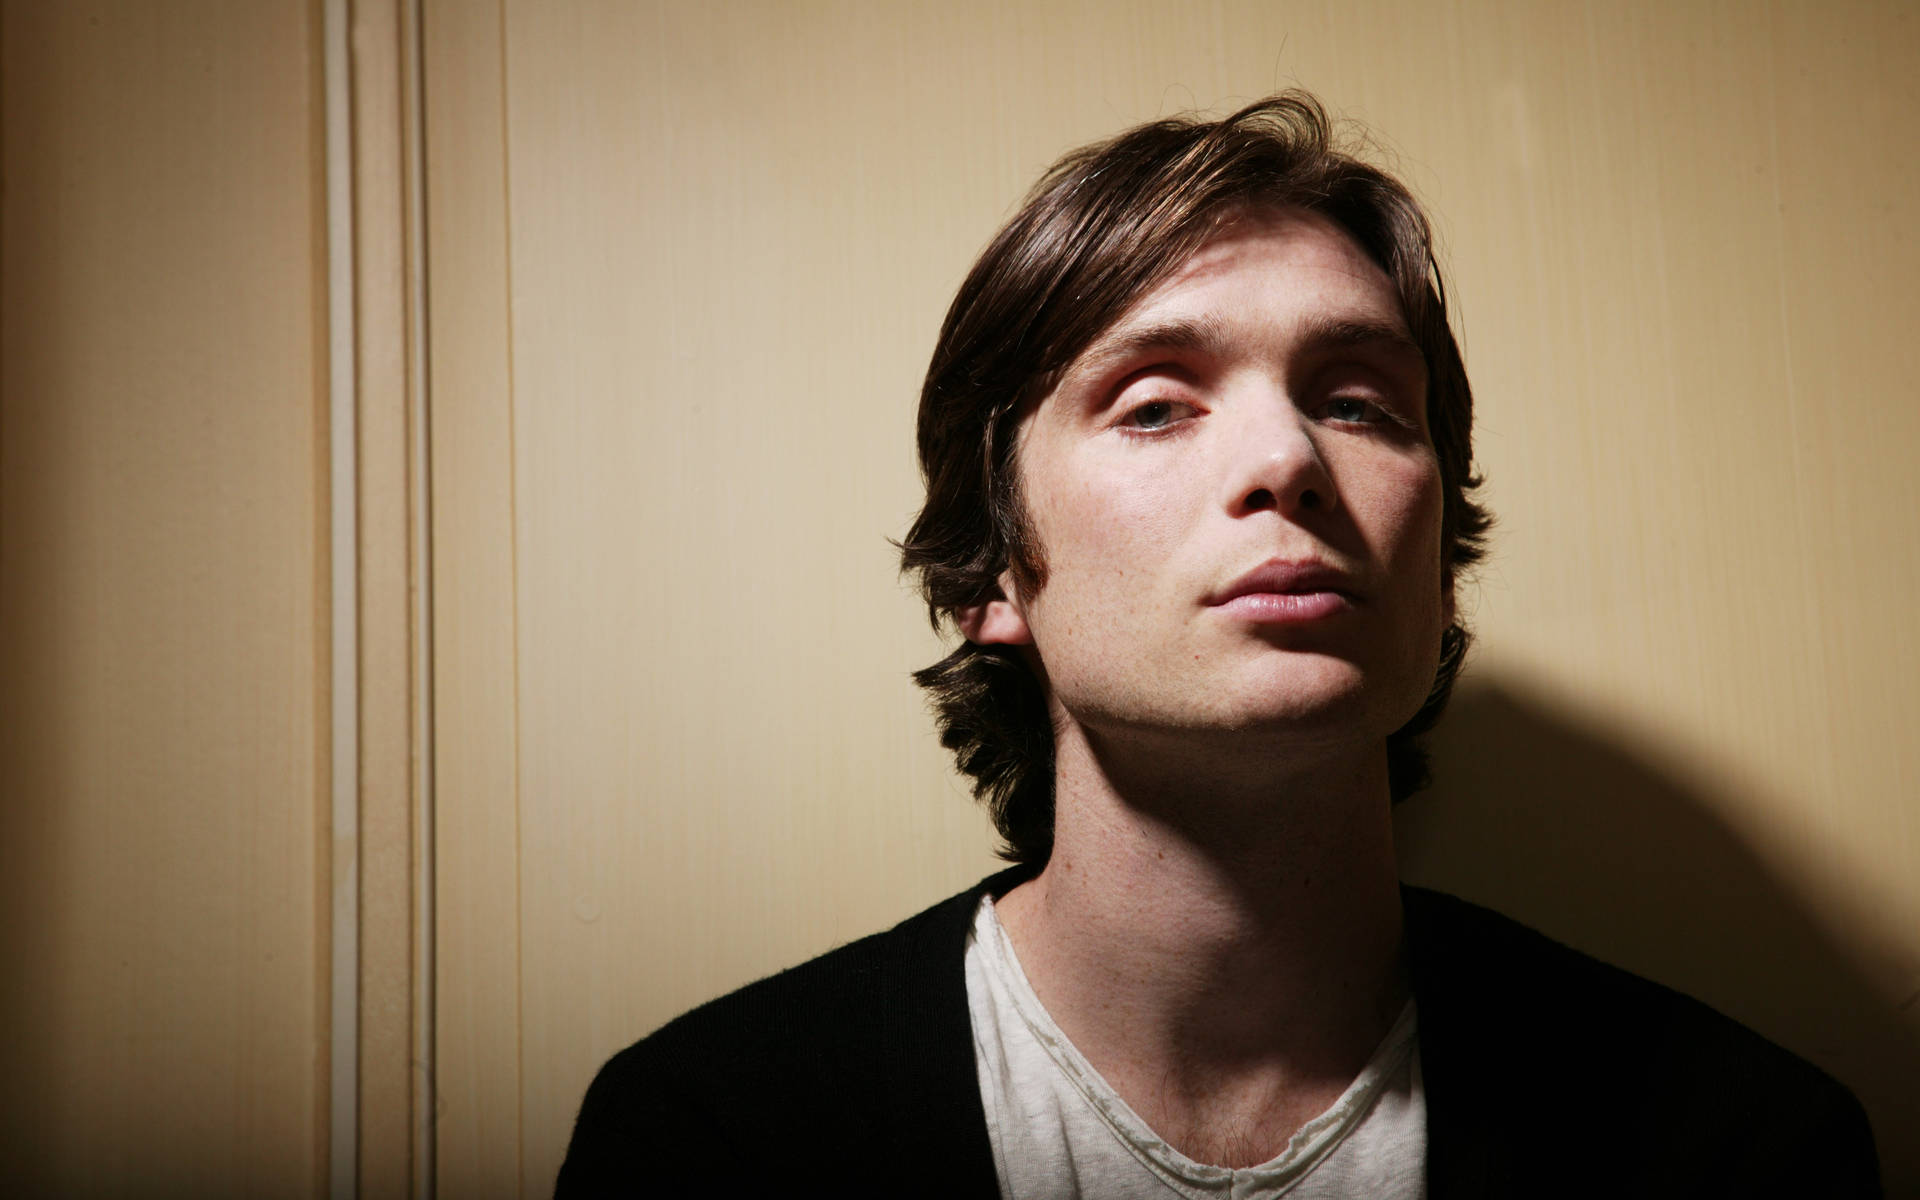 Young Cillian Murphy Background